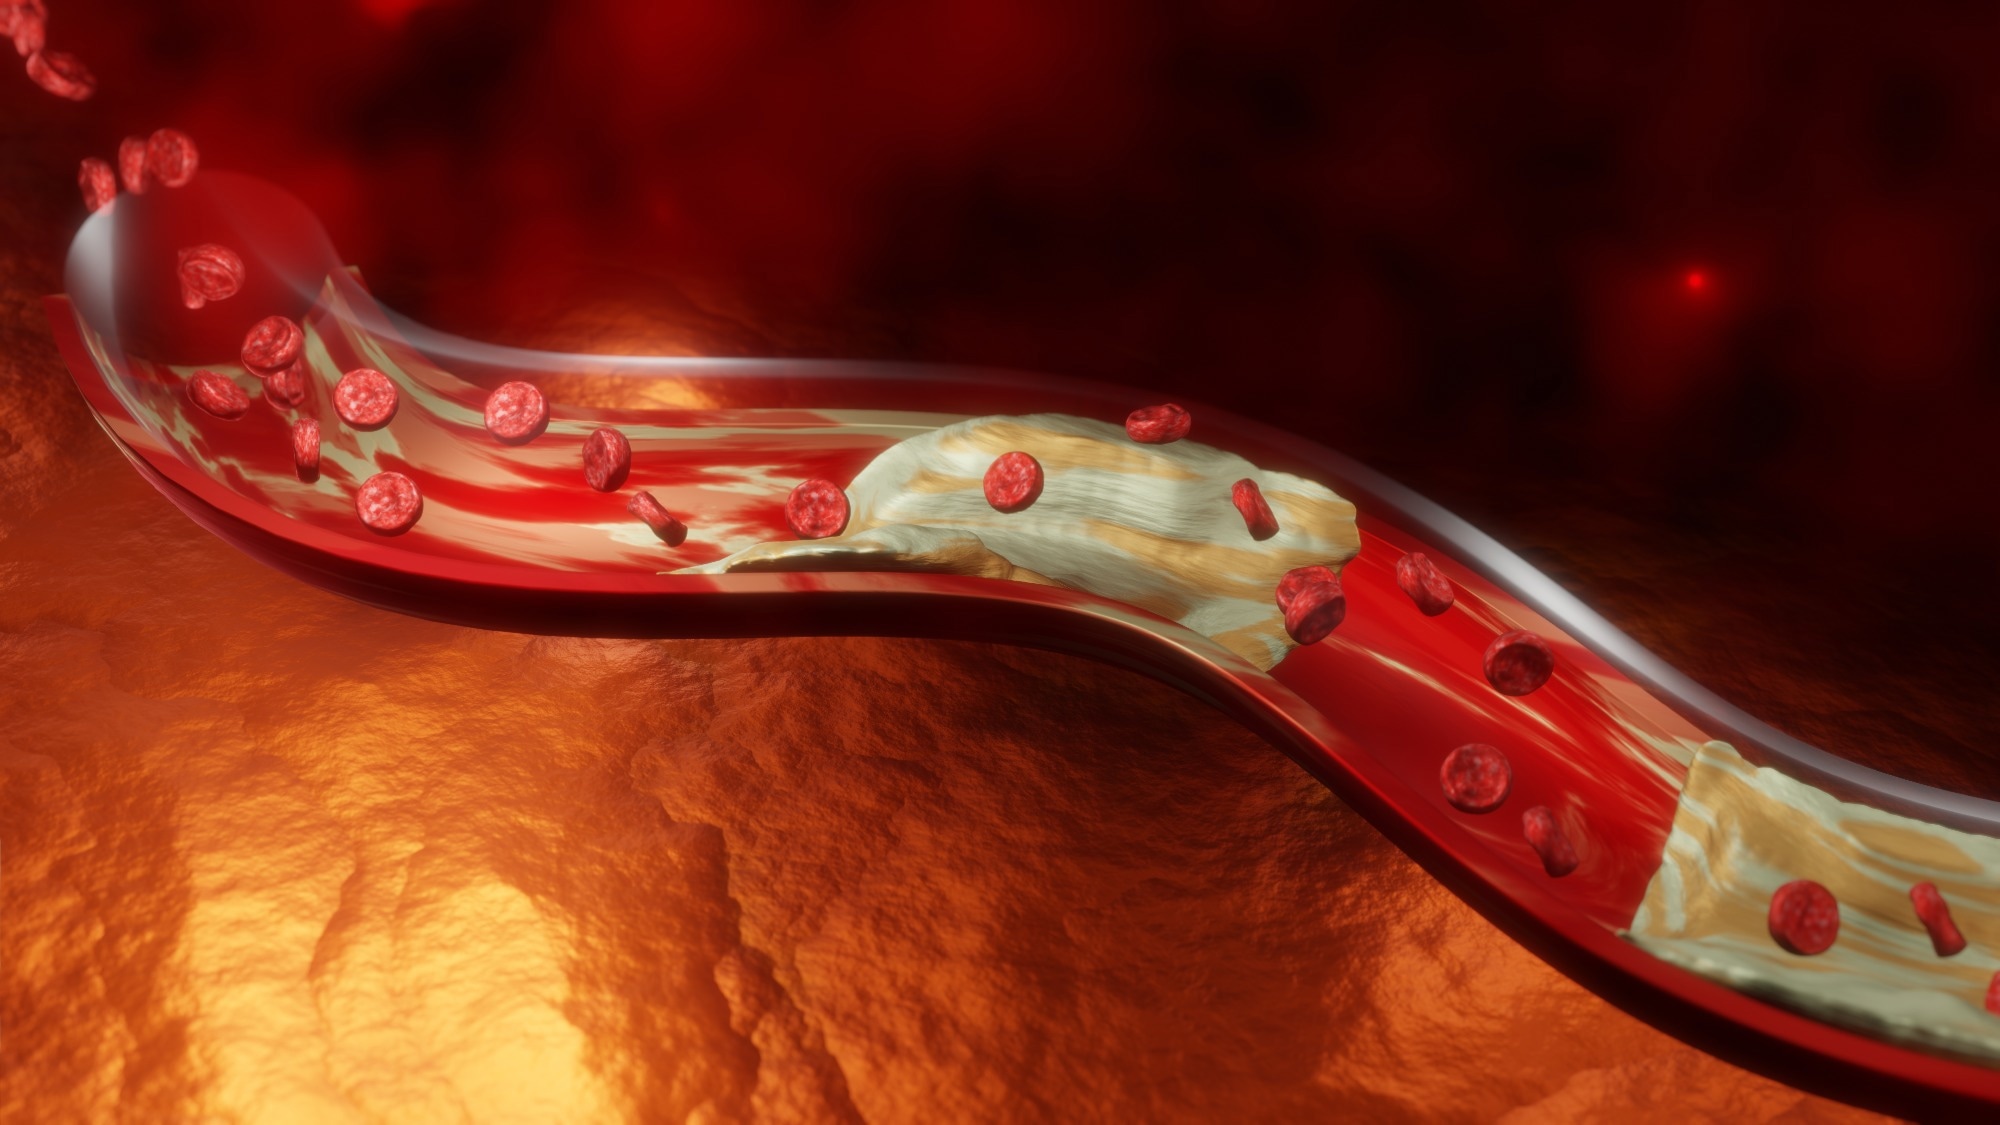 Study: Sex differences in risk factors for incident peripheral artery disease hospitalisation or death: Cohort study of UK Biobank participants. Image Credit: Anshuman Rath/Shutterstock.com